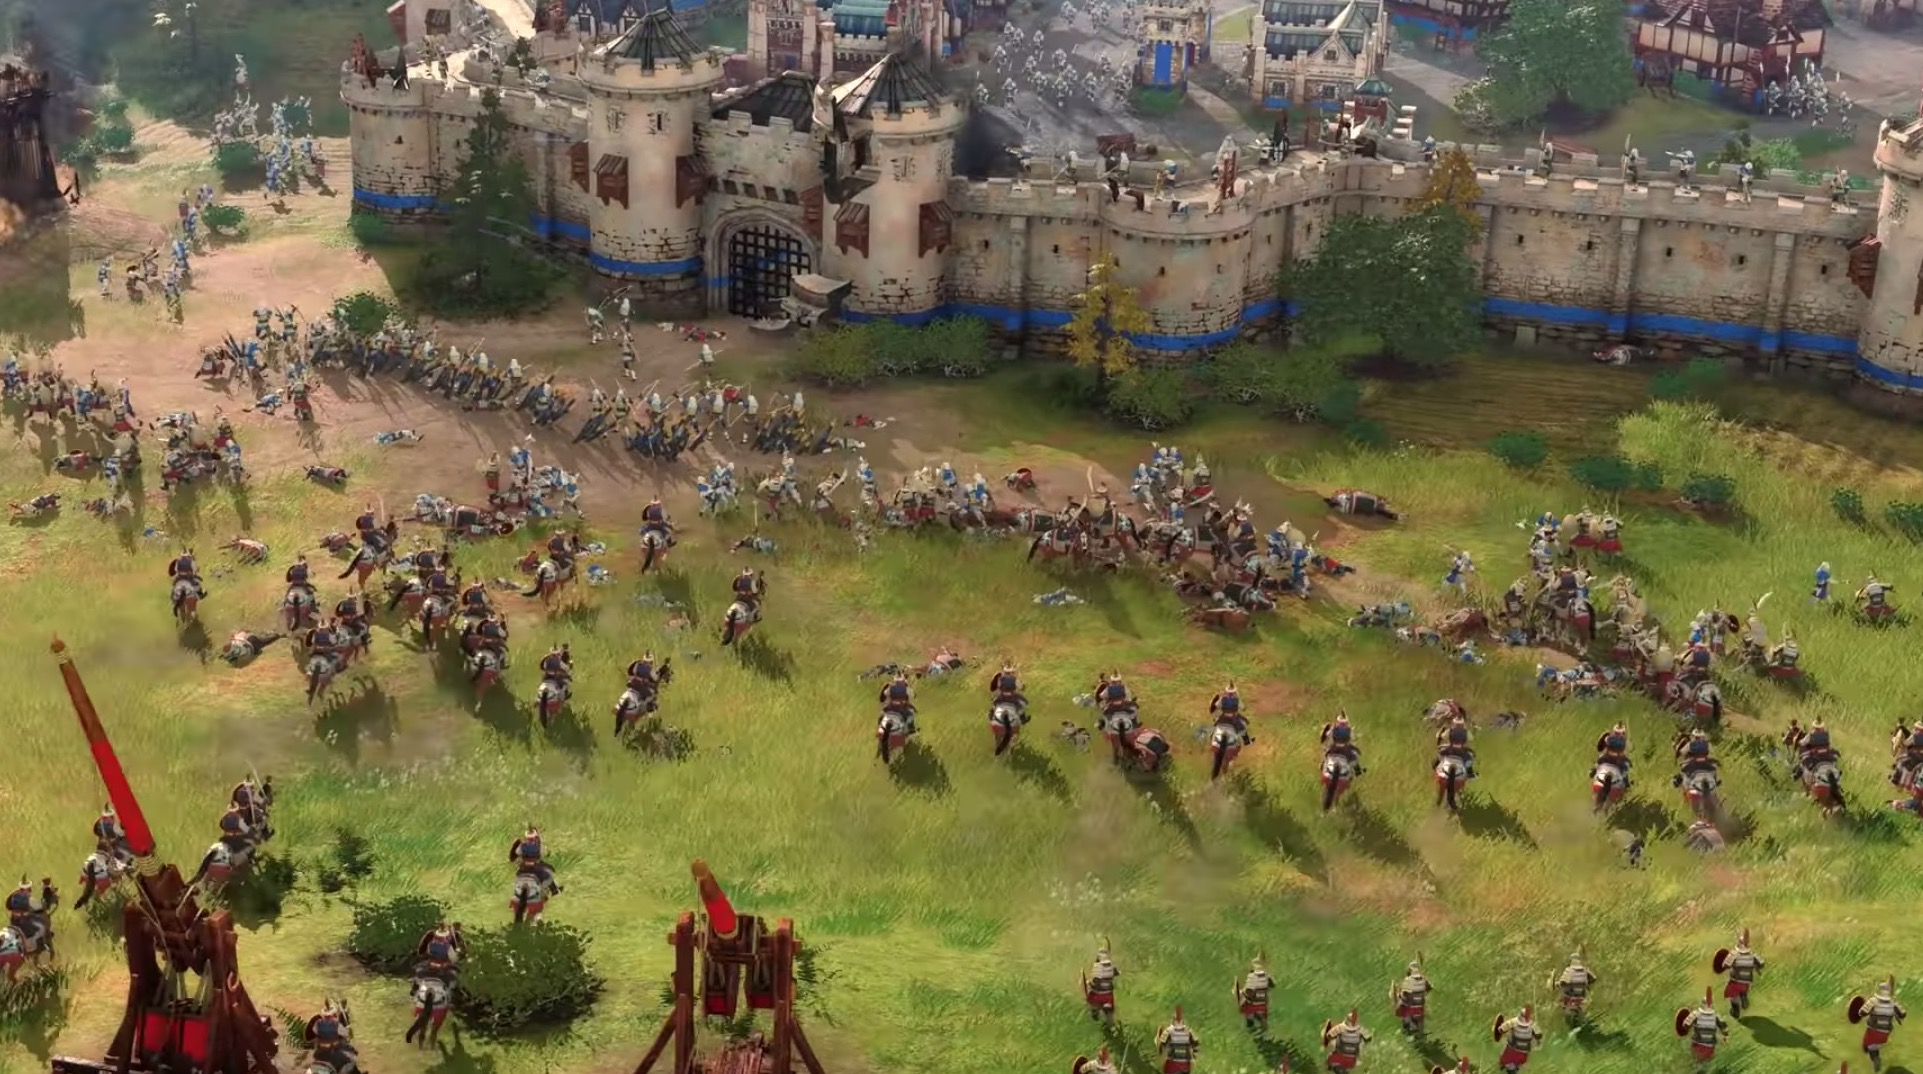 age of empires iv launch date